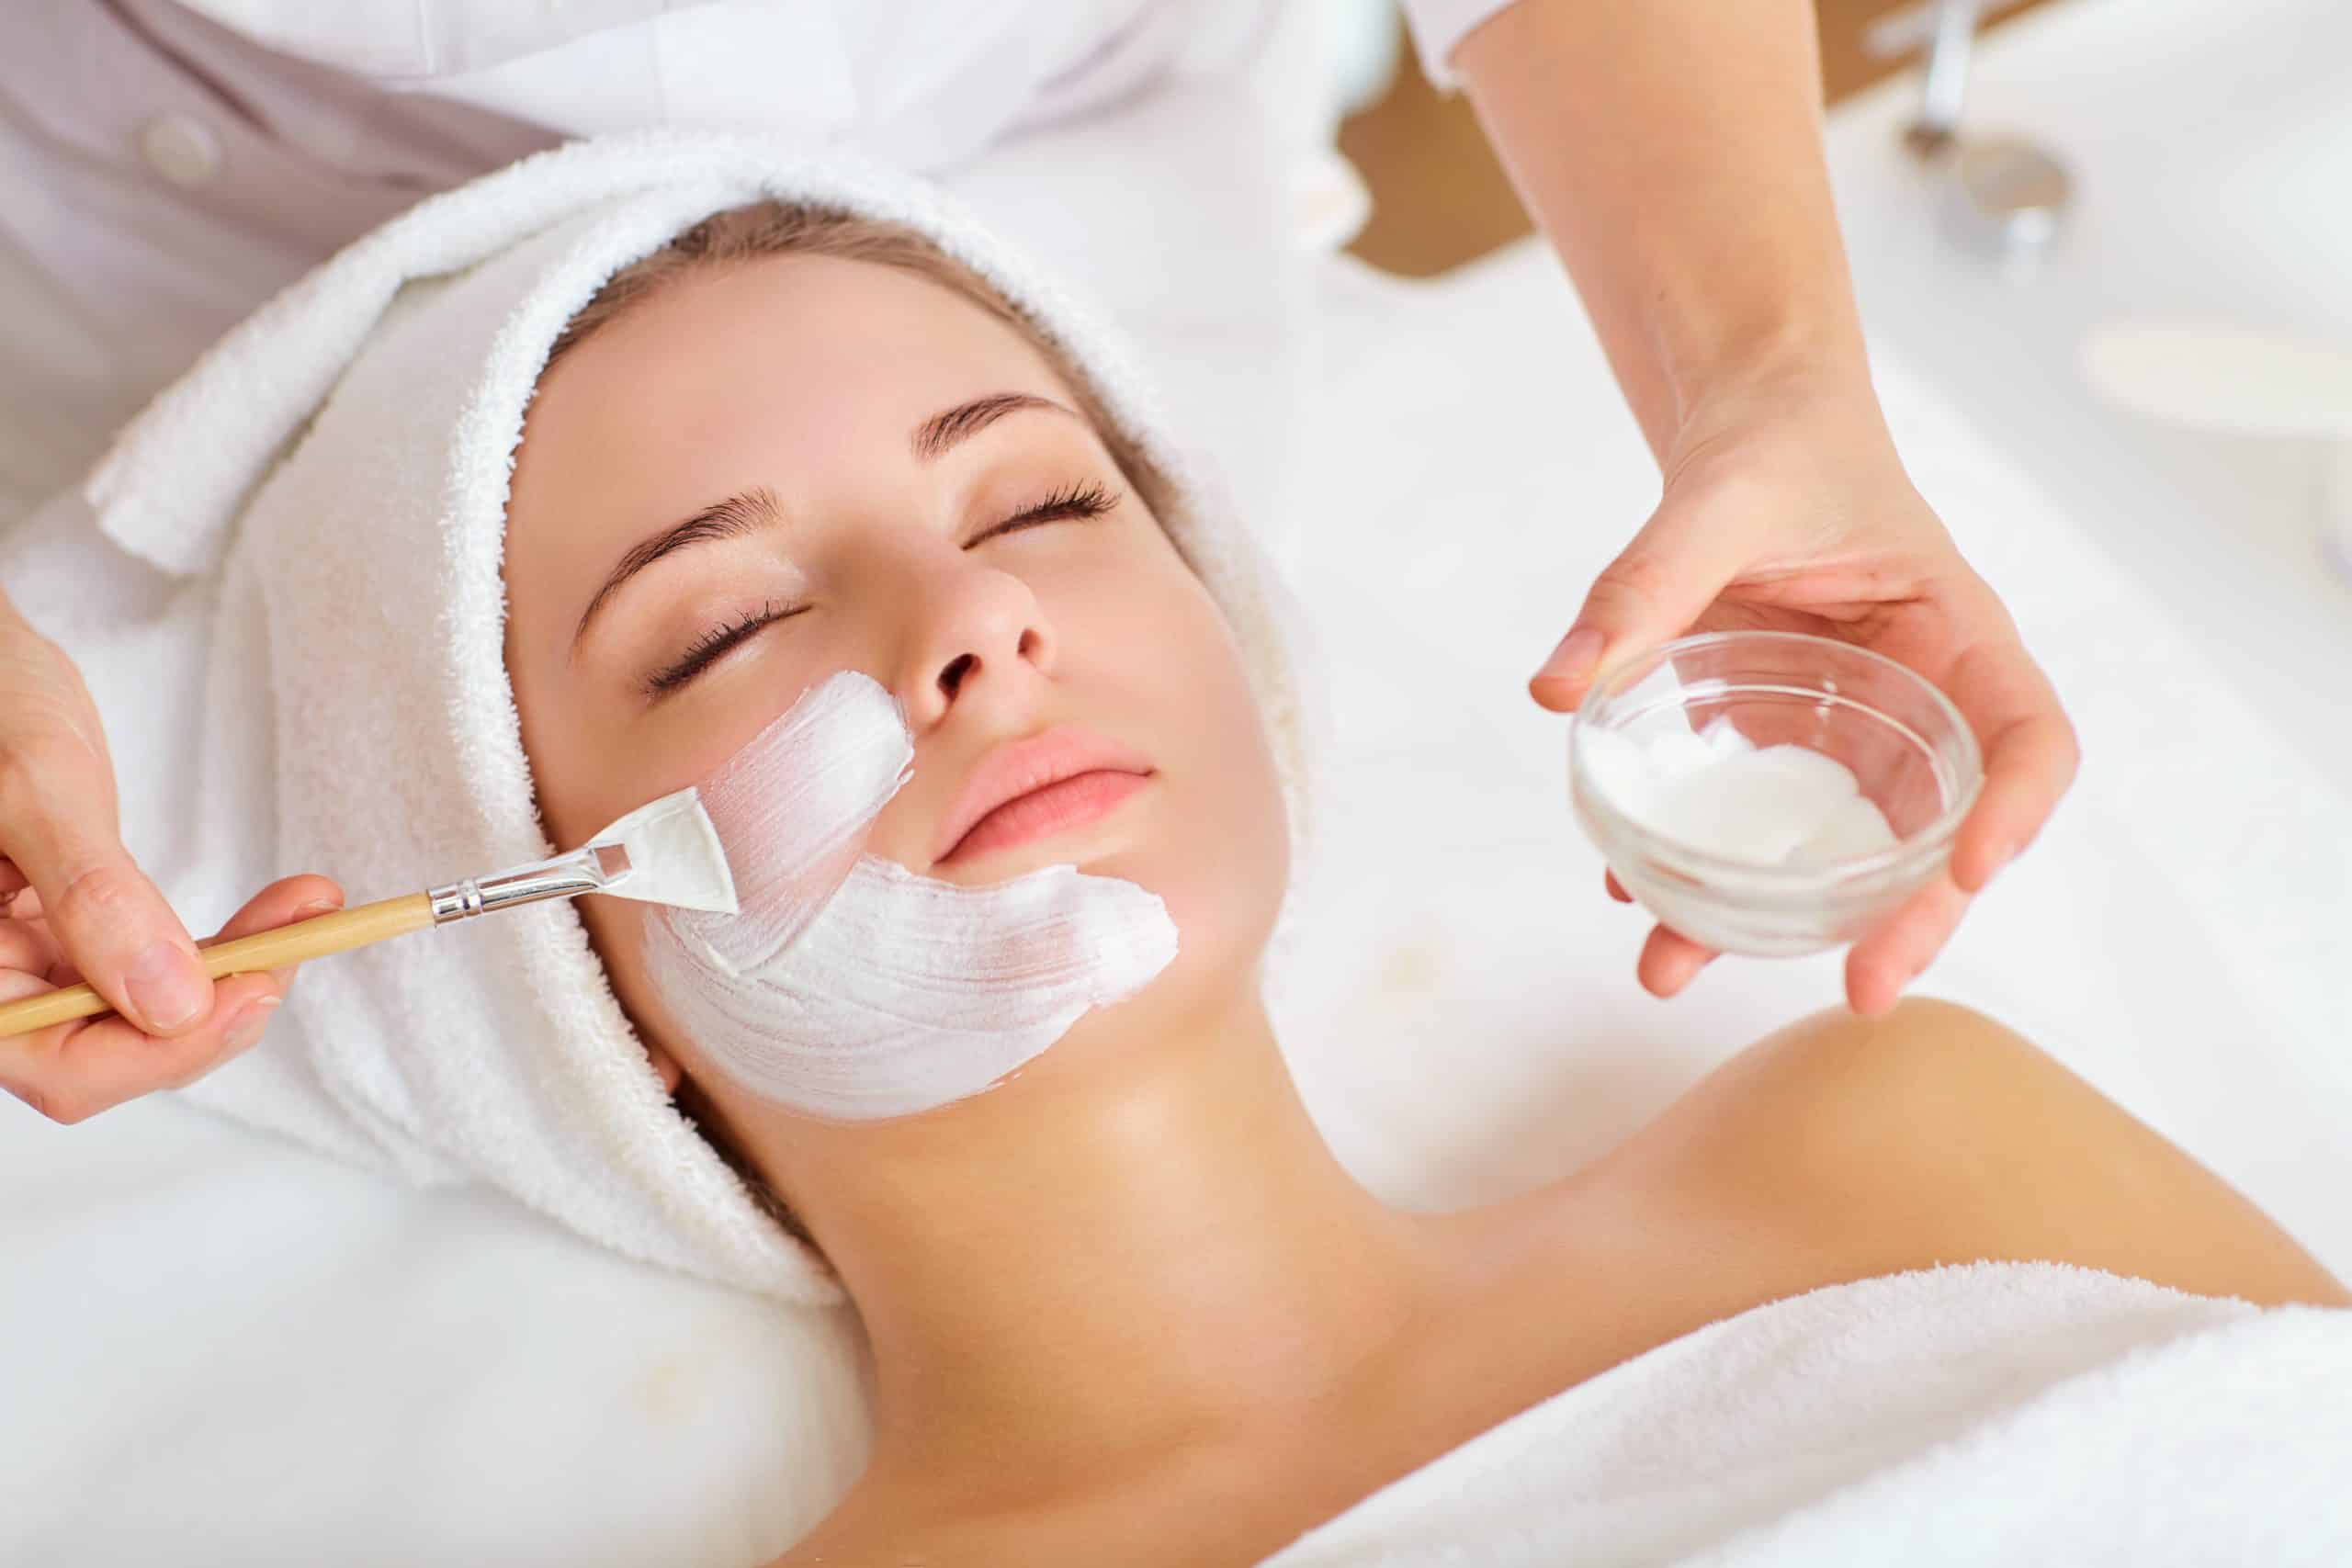 10 Things To Know Before Getting Your Facial Waxing